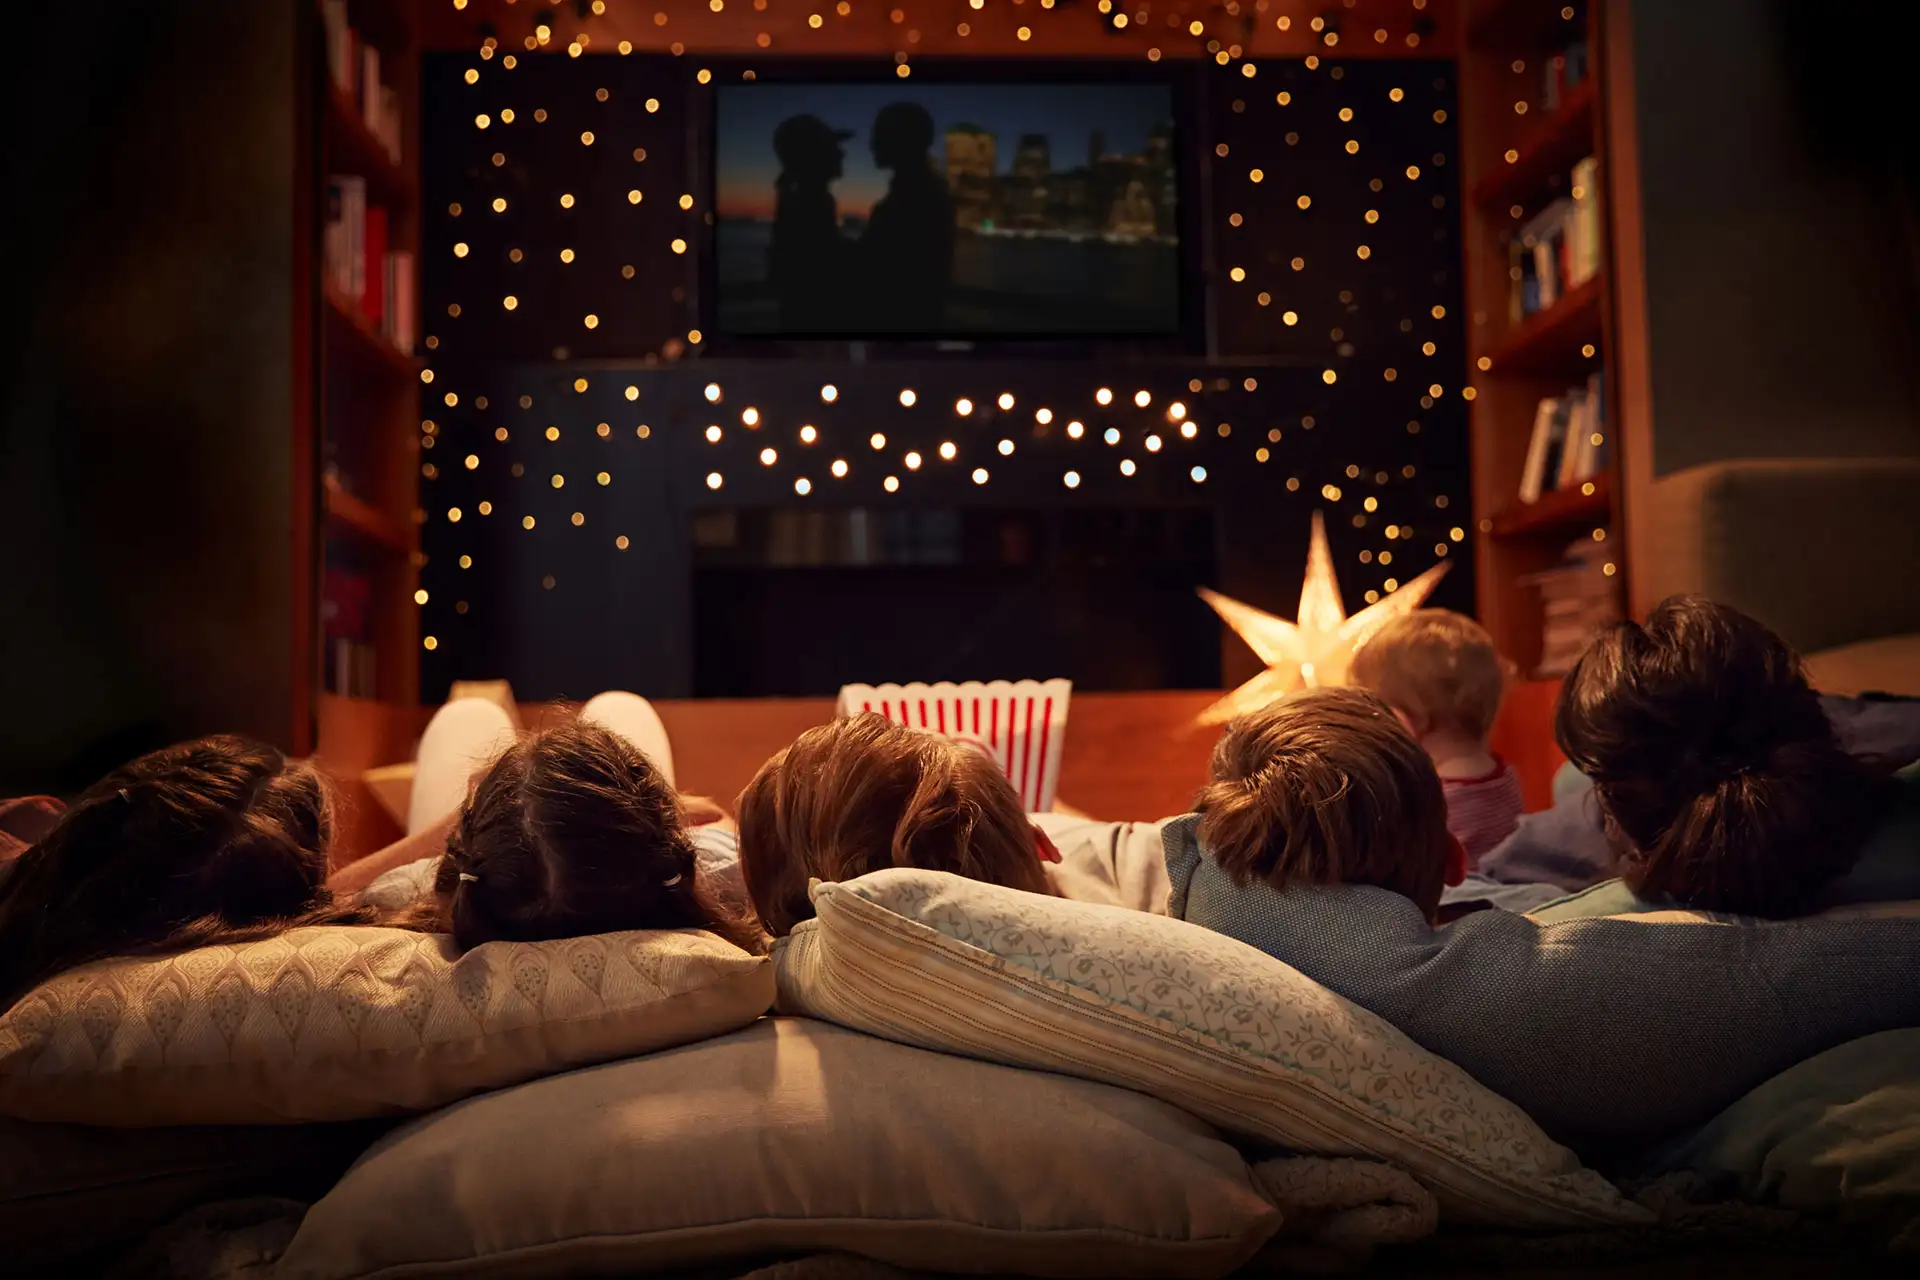 A family enjoying a movie night at home.